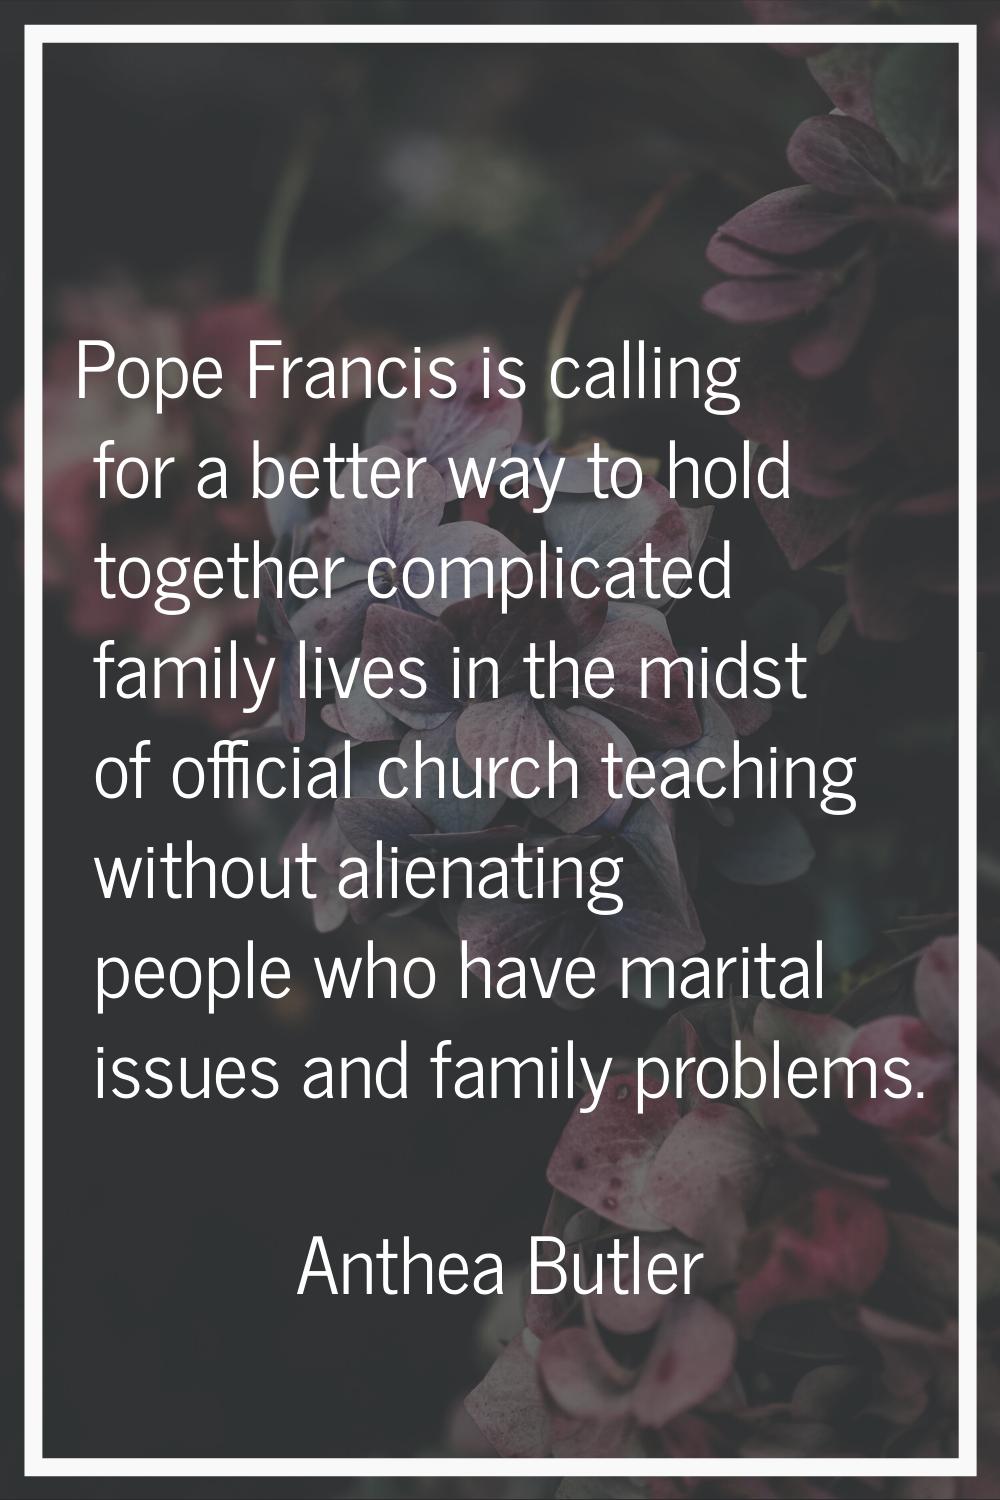 Pope Francis is calling for a better way to hold together complicated family lives in the midst of 